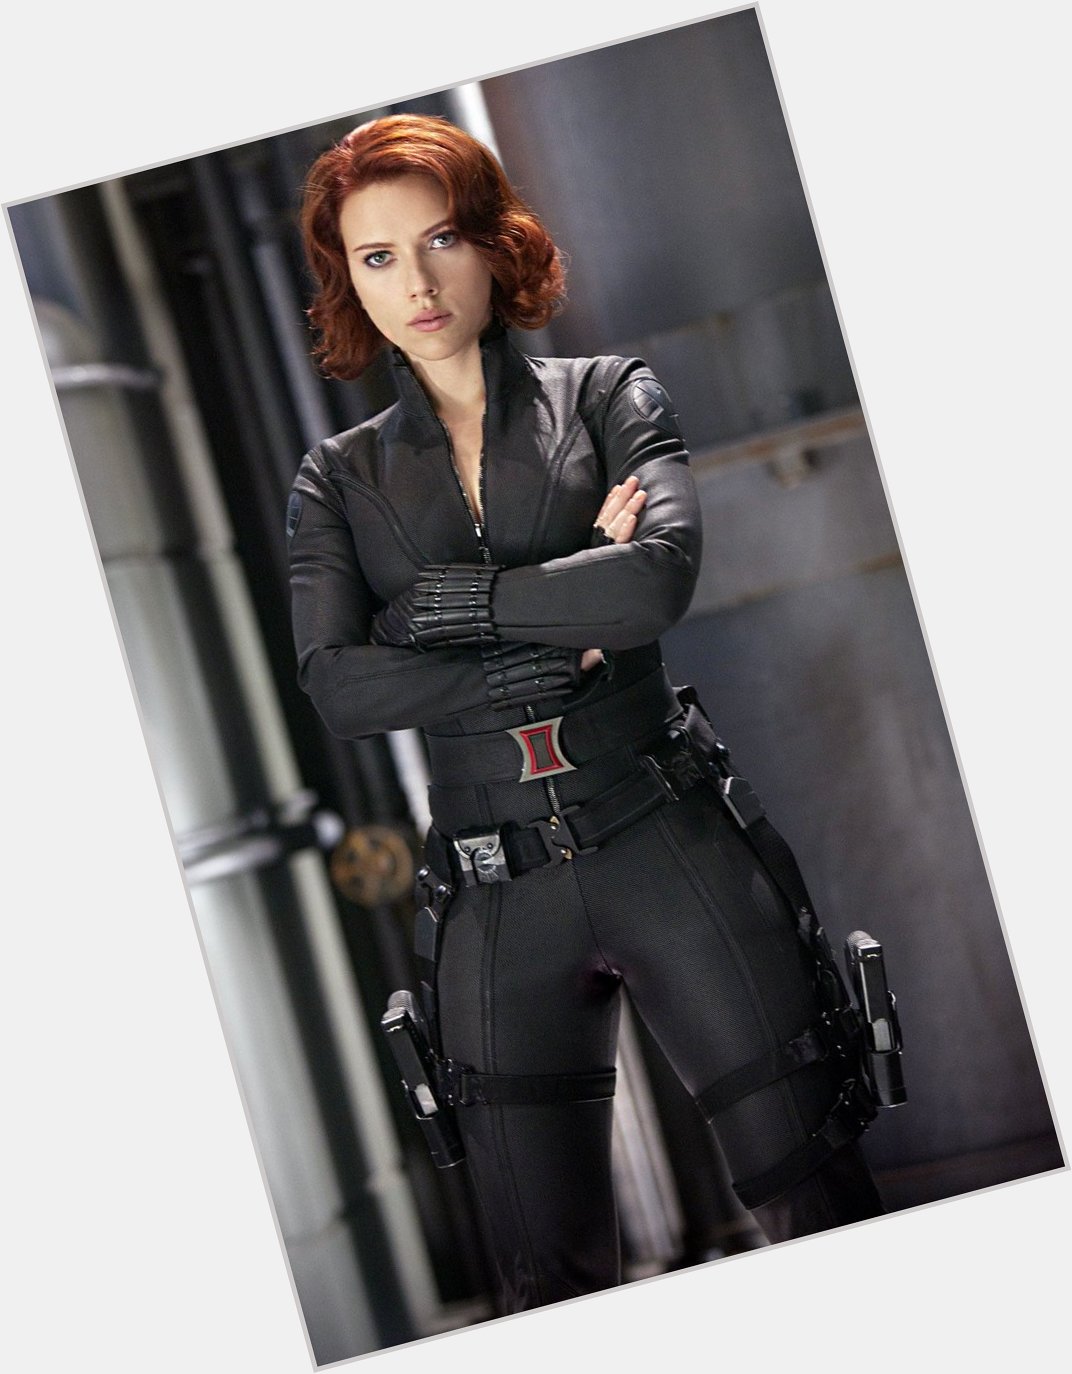 Happy birthday to Scarlett Johansson! who plays our incredible super Agent Romanoff! 